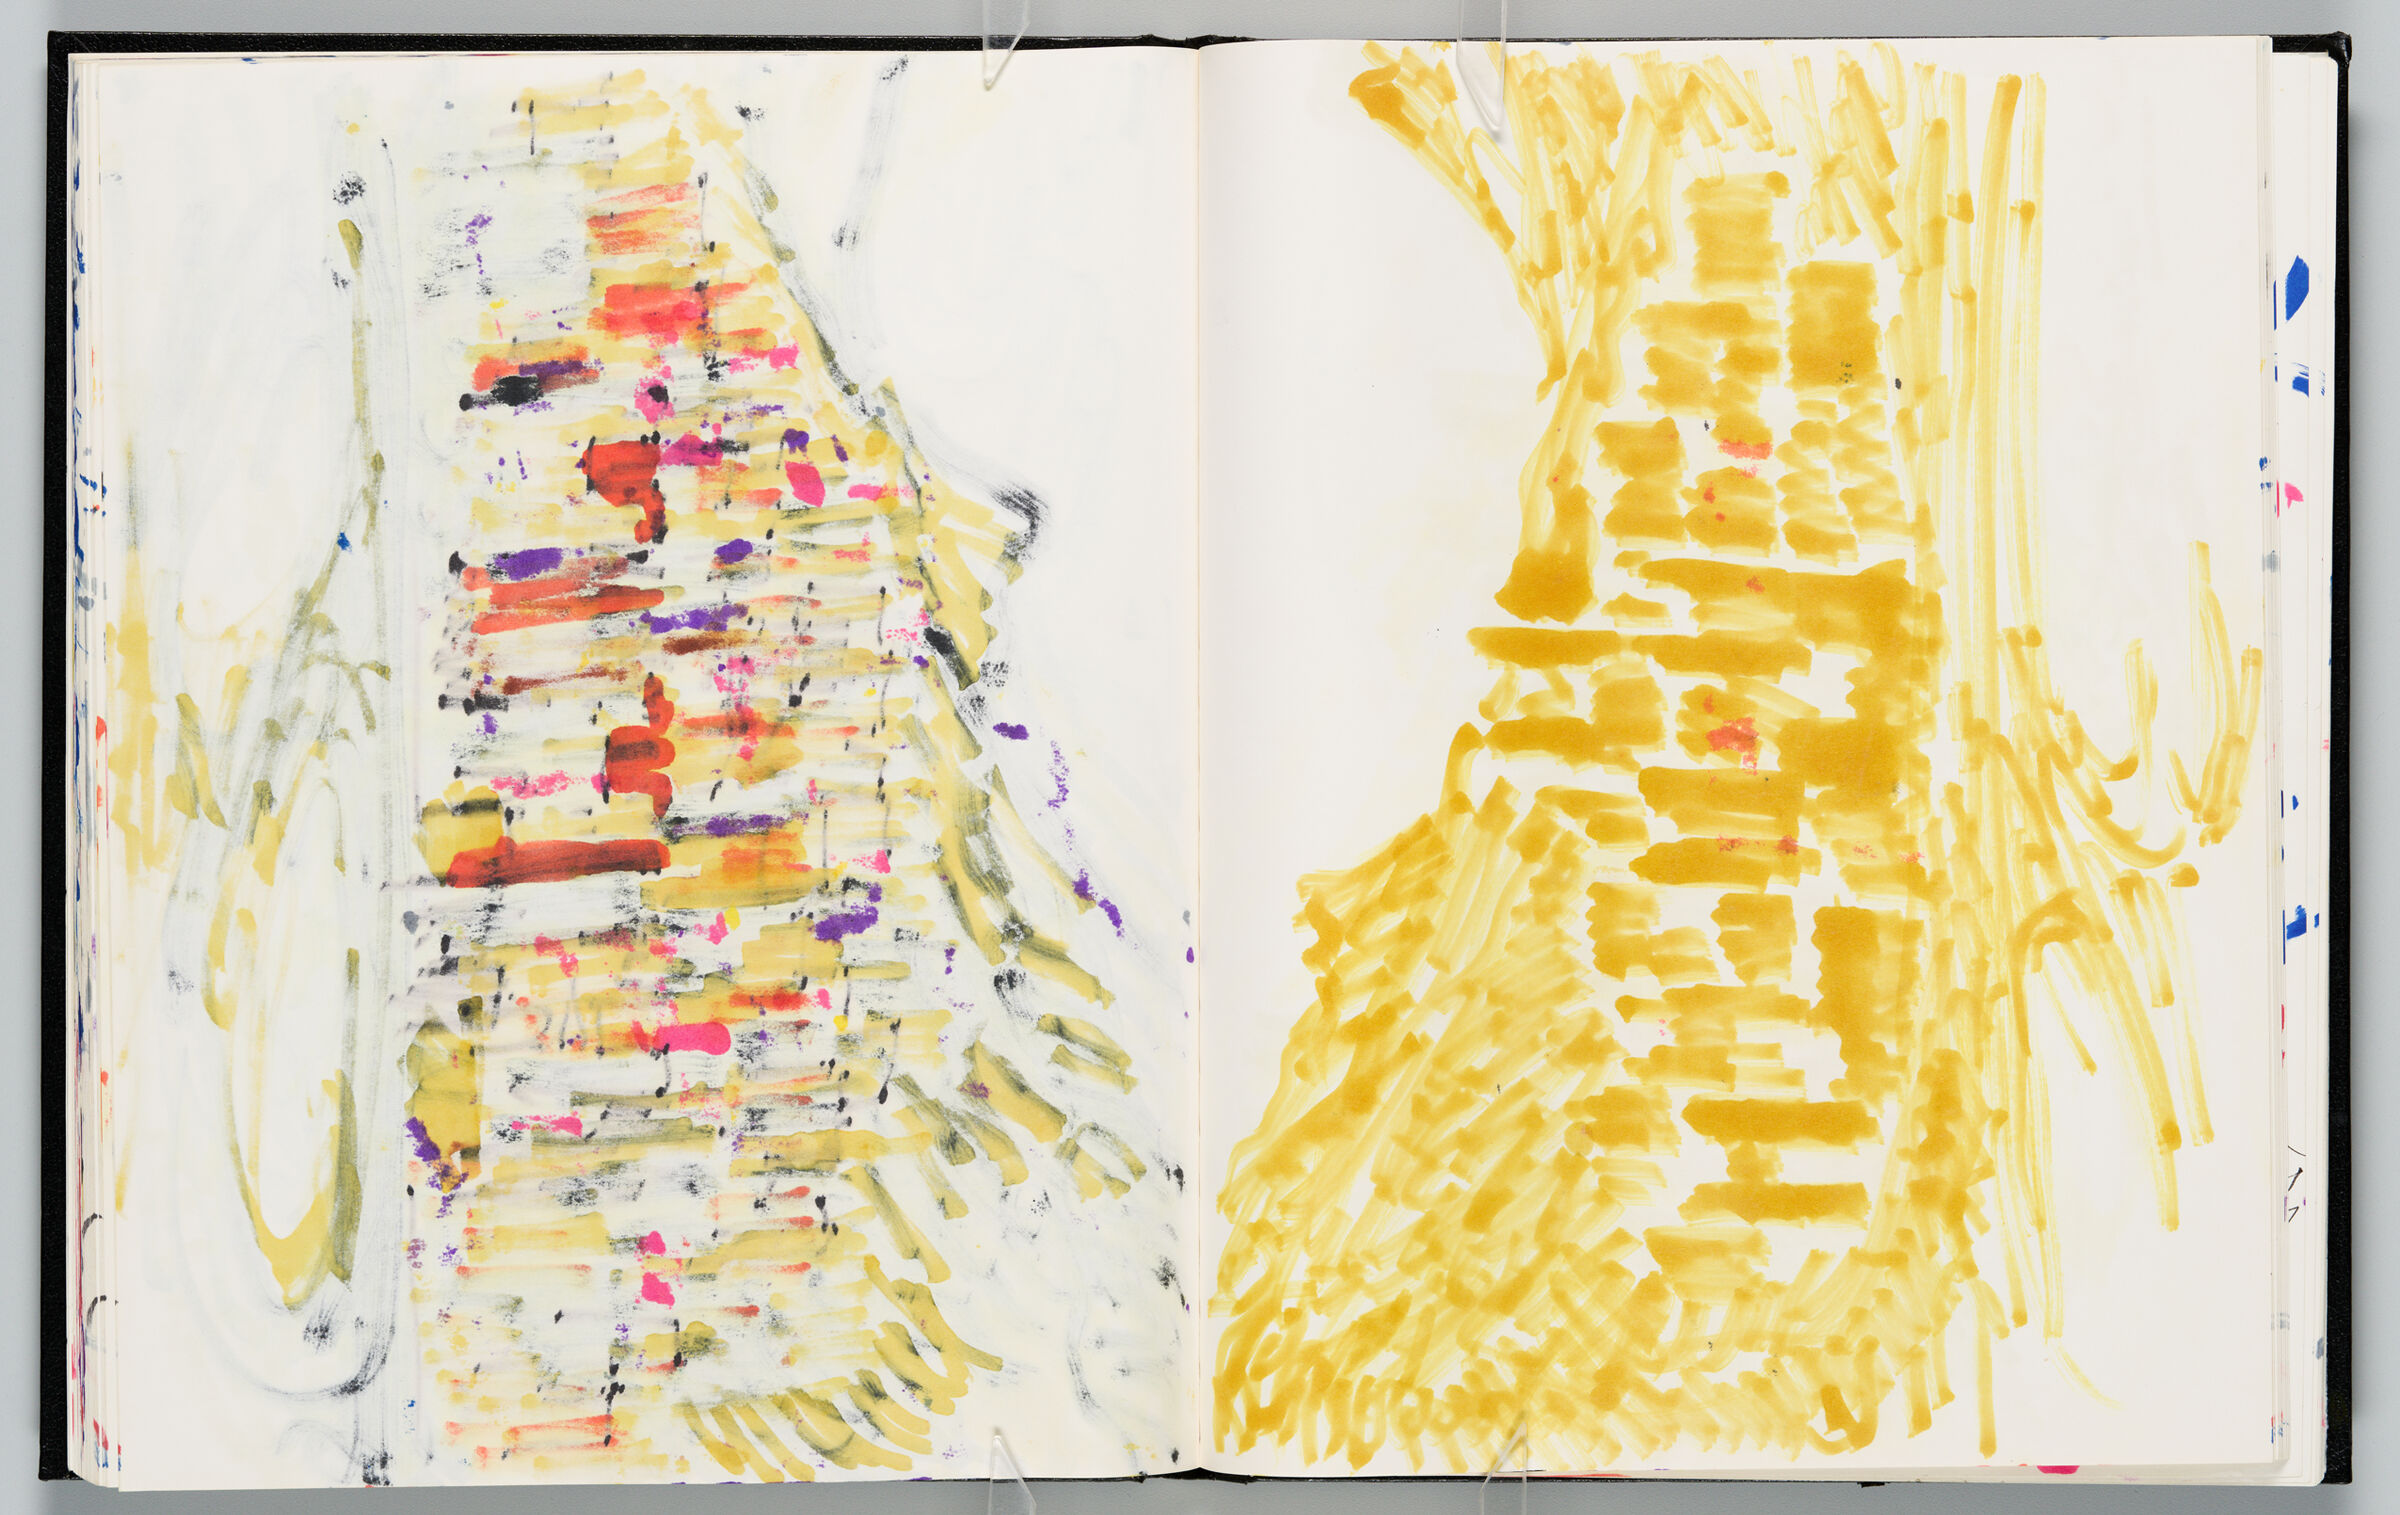 Untitled (Bleed-Through Of Previous Page, Left Page); Untitled (View Of Taroudant With Color Transfer, Right Page)